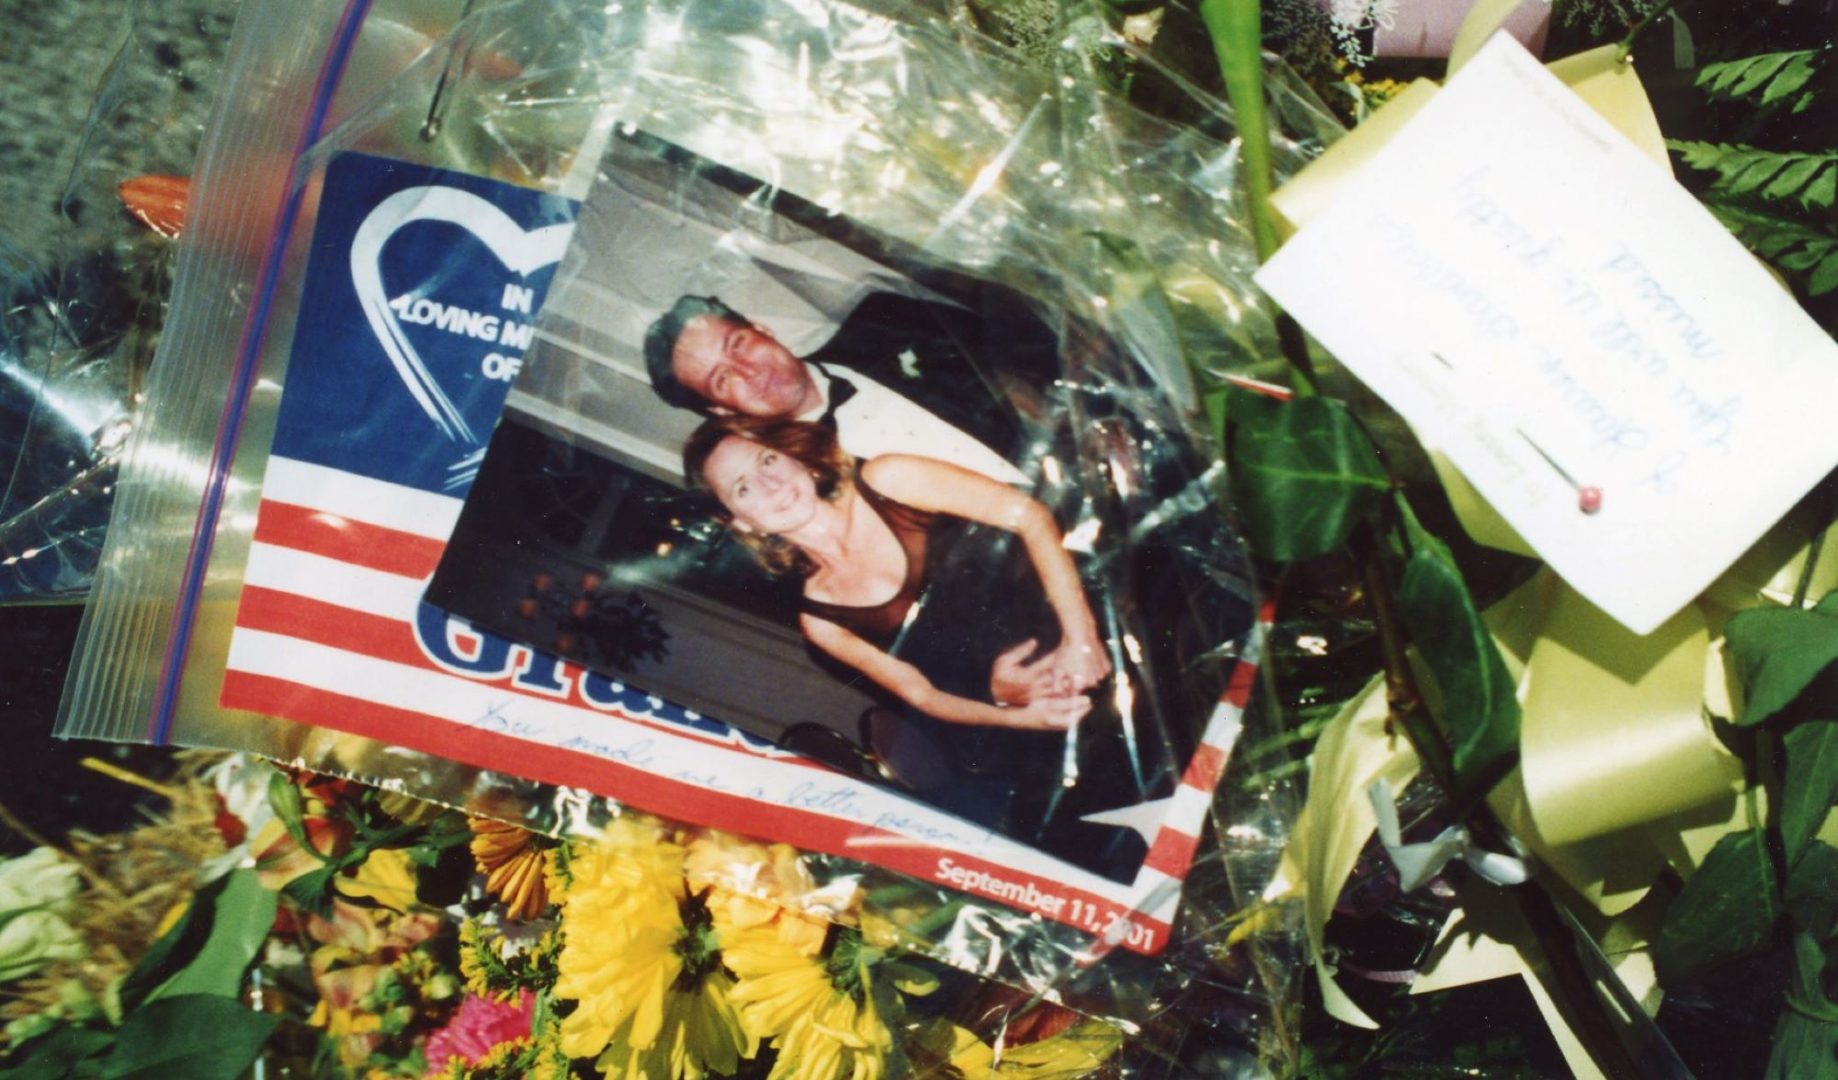 Jack and Lauren Grandcolas. Lauren and the couple's unborn child were killed on Flight 93 on September 11, 2001.